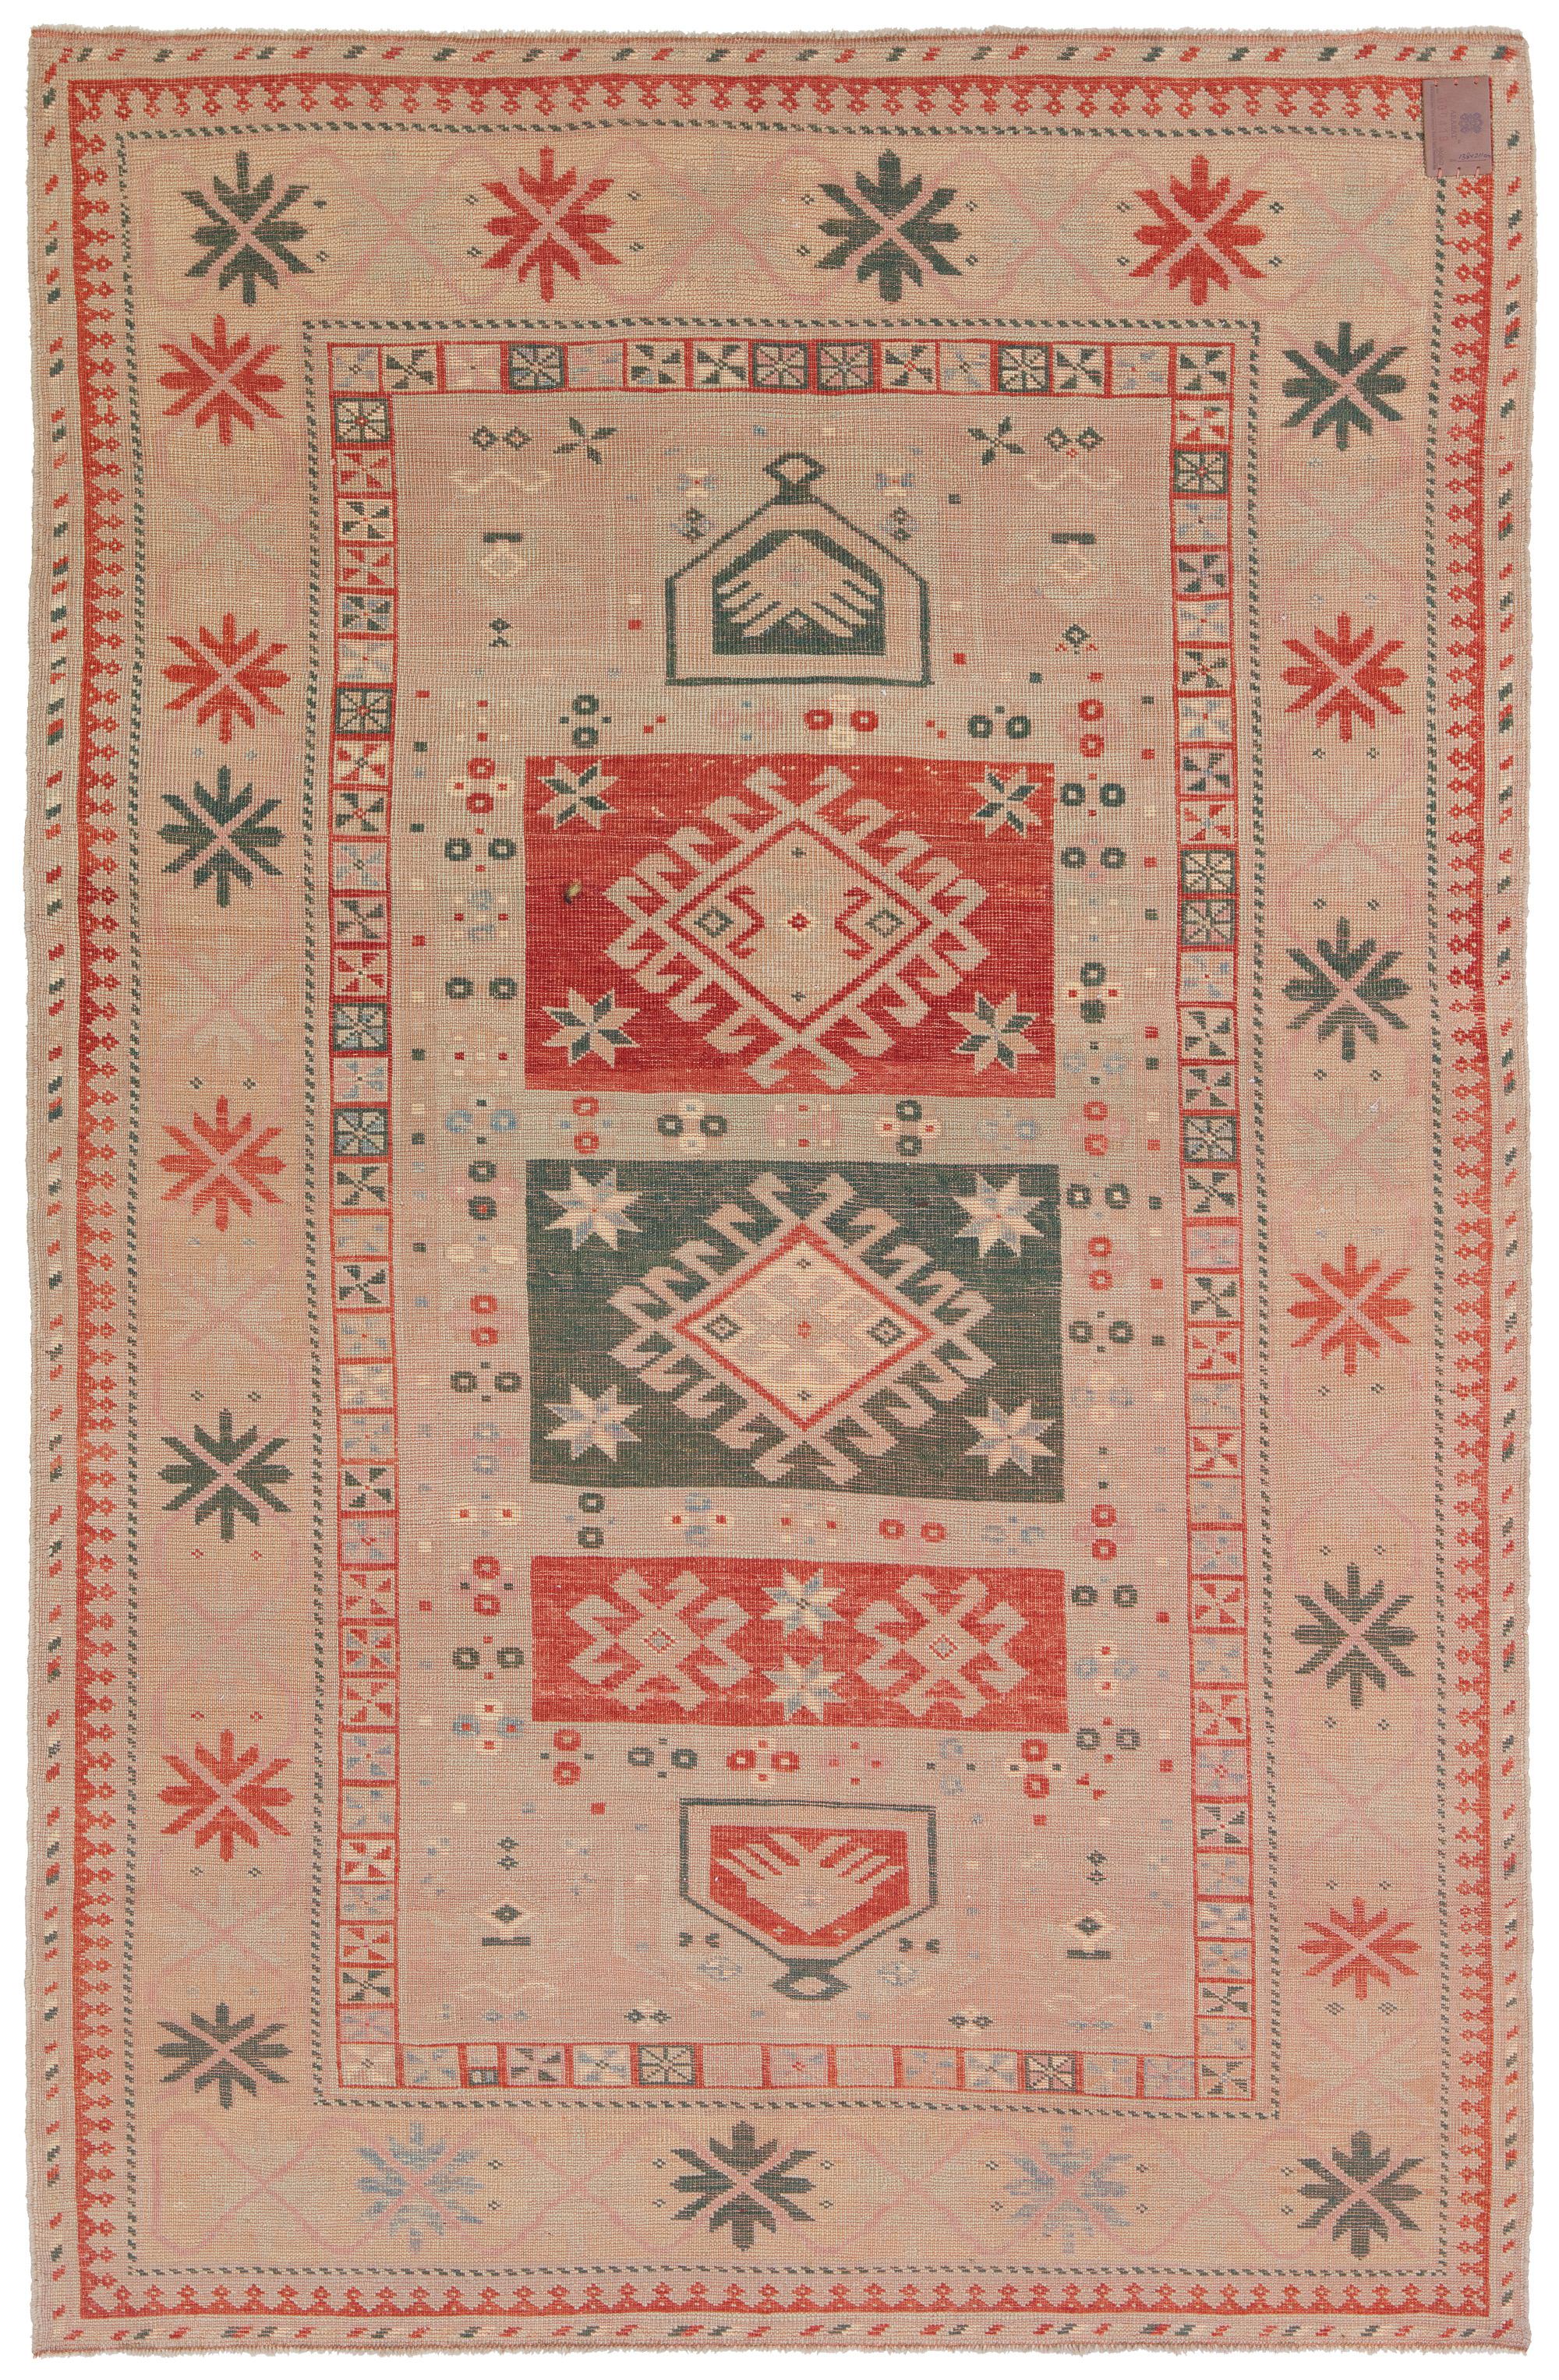 The source of the rug comes from the book Tapis du Caucase – Rugs of the Caucasus, Ian Bennett & Aziz Bassoul, The Nicholas Sursock Museum, Beirut, Lebanon 2003, nr.46. This is a double migrab prayer rug from the late 19th century, Genje ( Gendje )